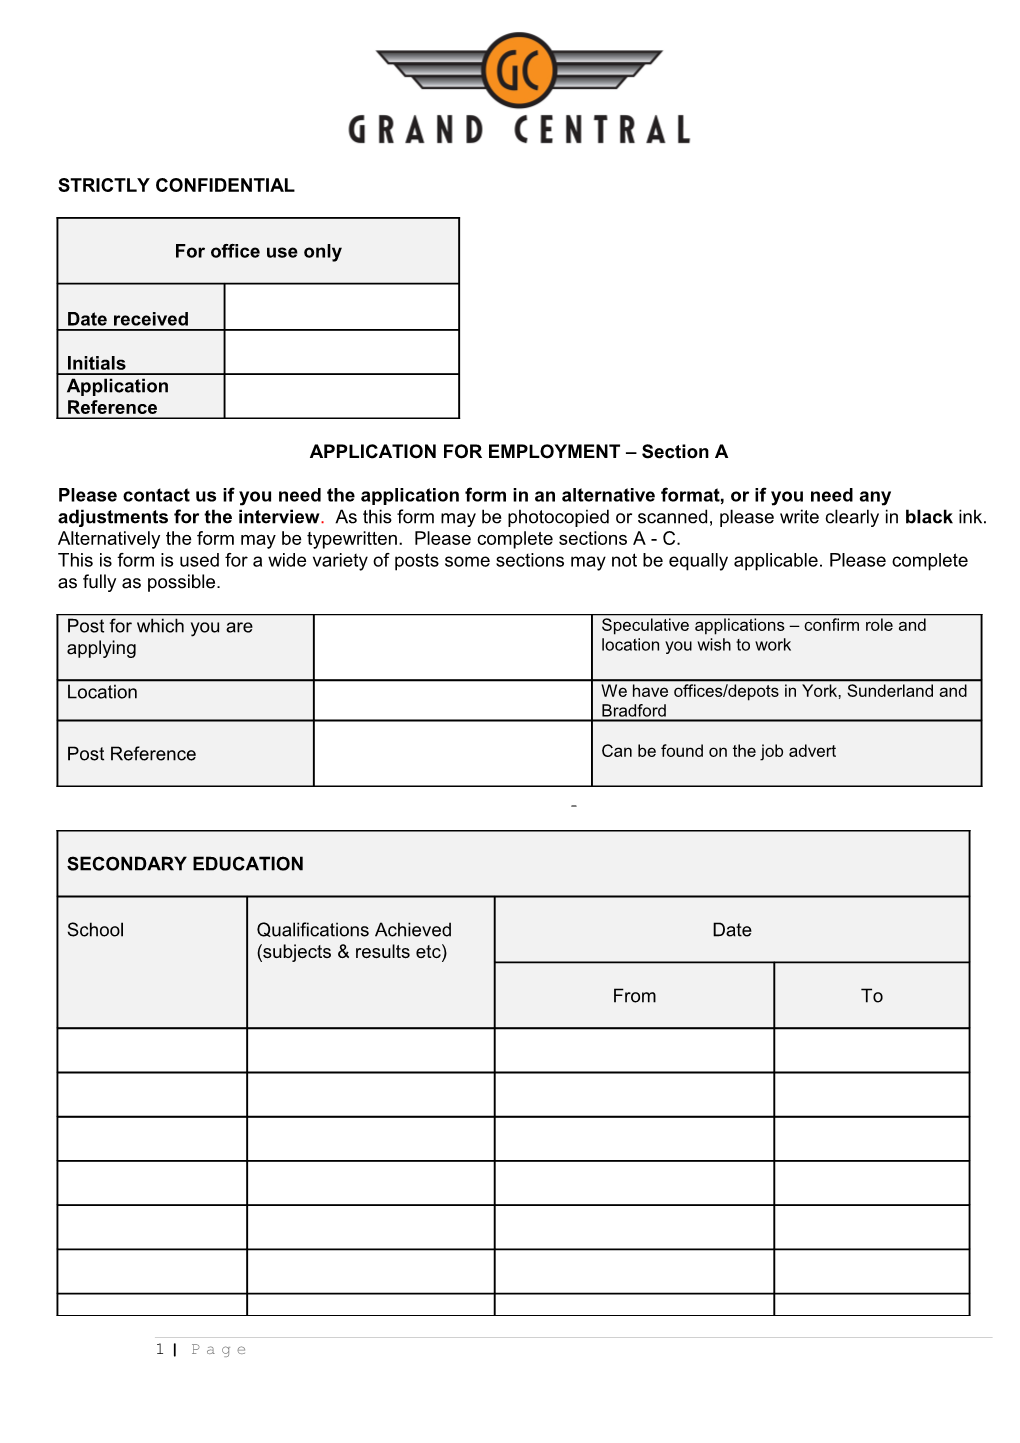 APPLICATION for EMPLOYMENT Section A